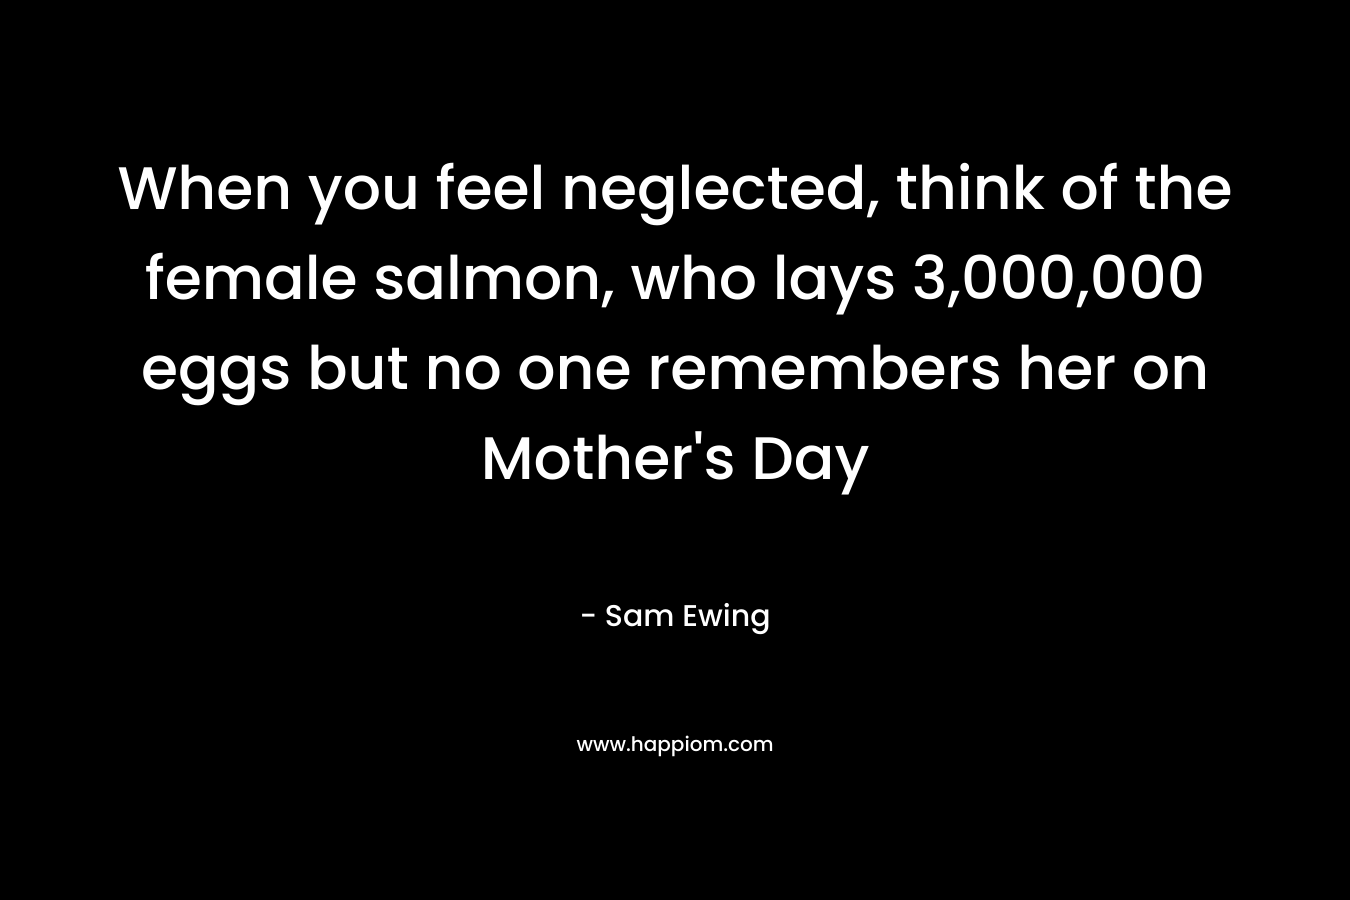 When you feel neglected, think of the female salmon, who lays 3,000,000 eggs but no one remembers her on Mother's Day